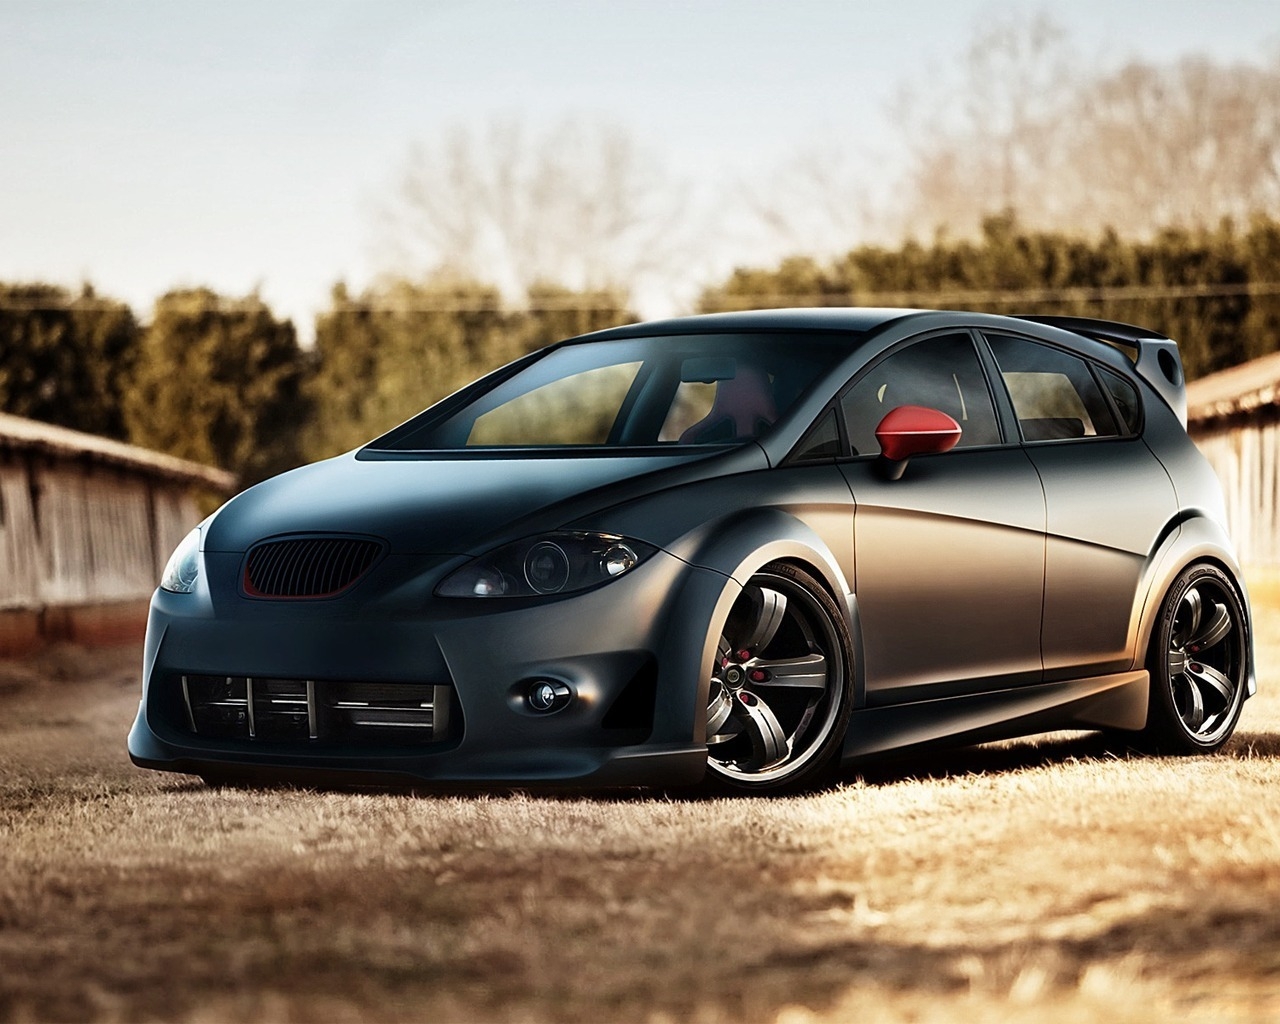 Seat Leon Tunning Front Angle for 1280 x 1024 resolution